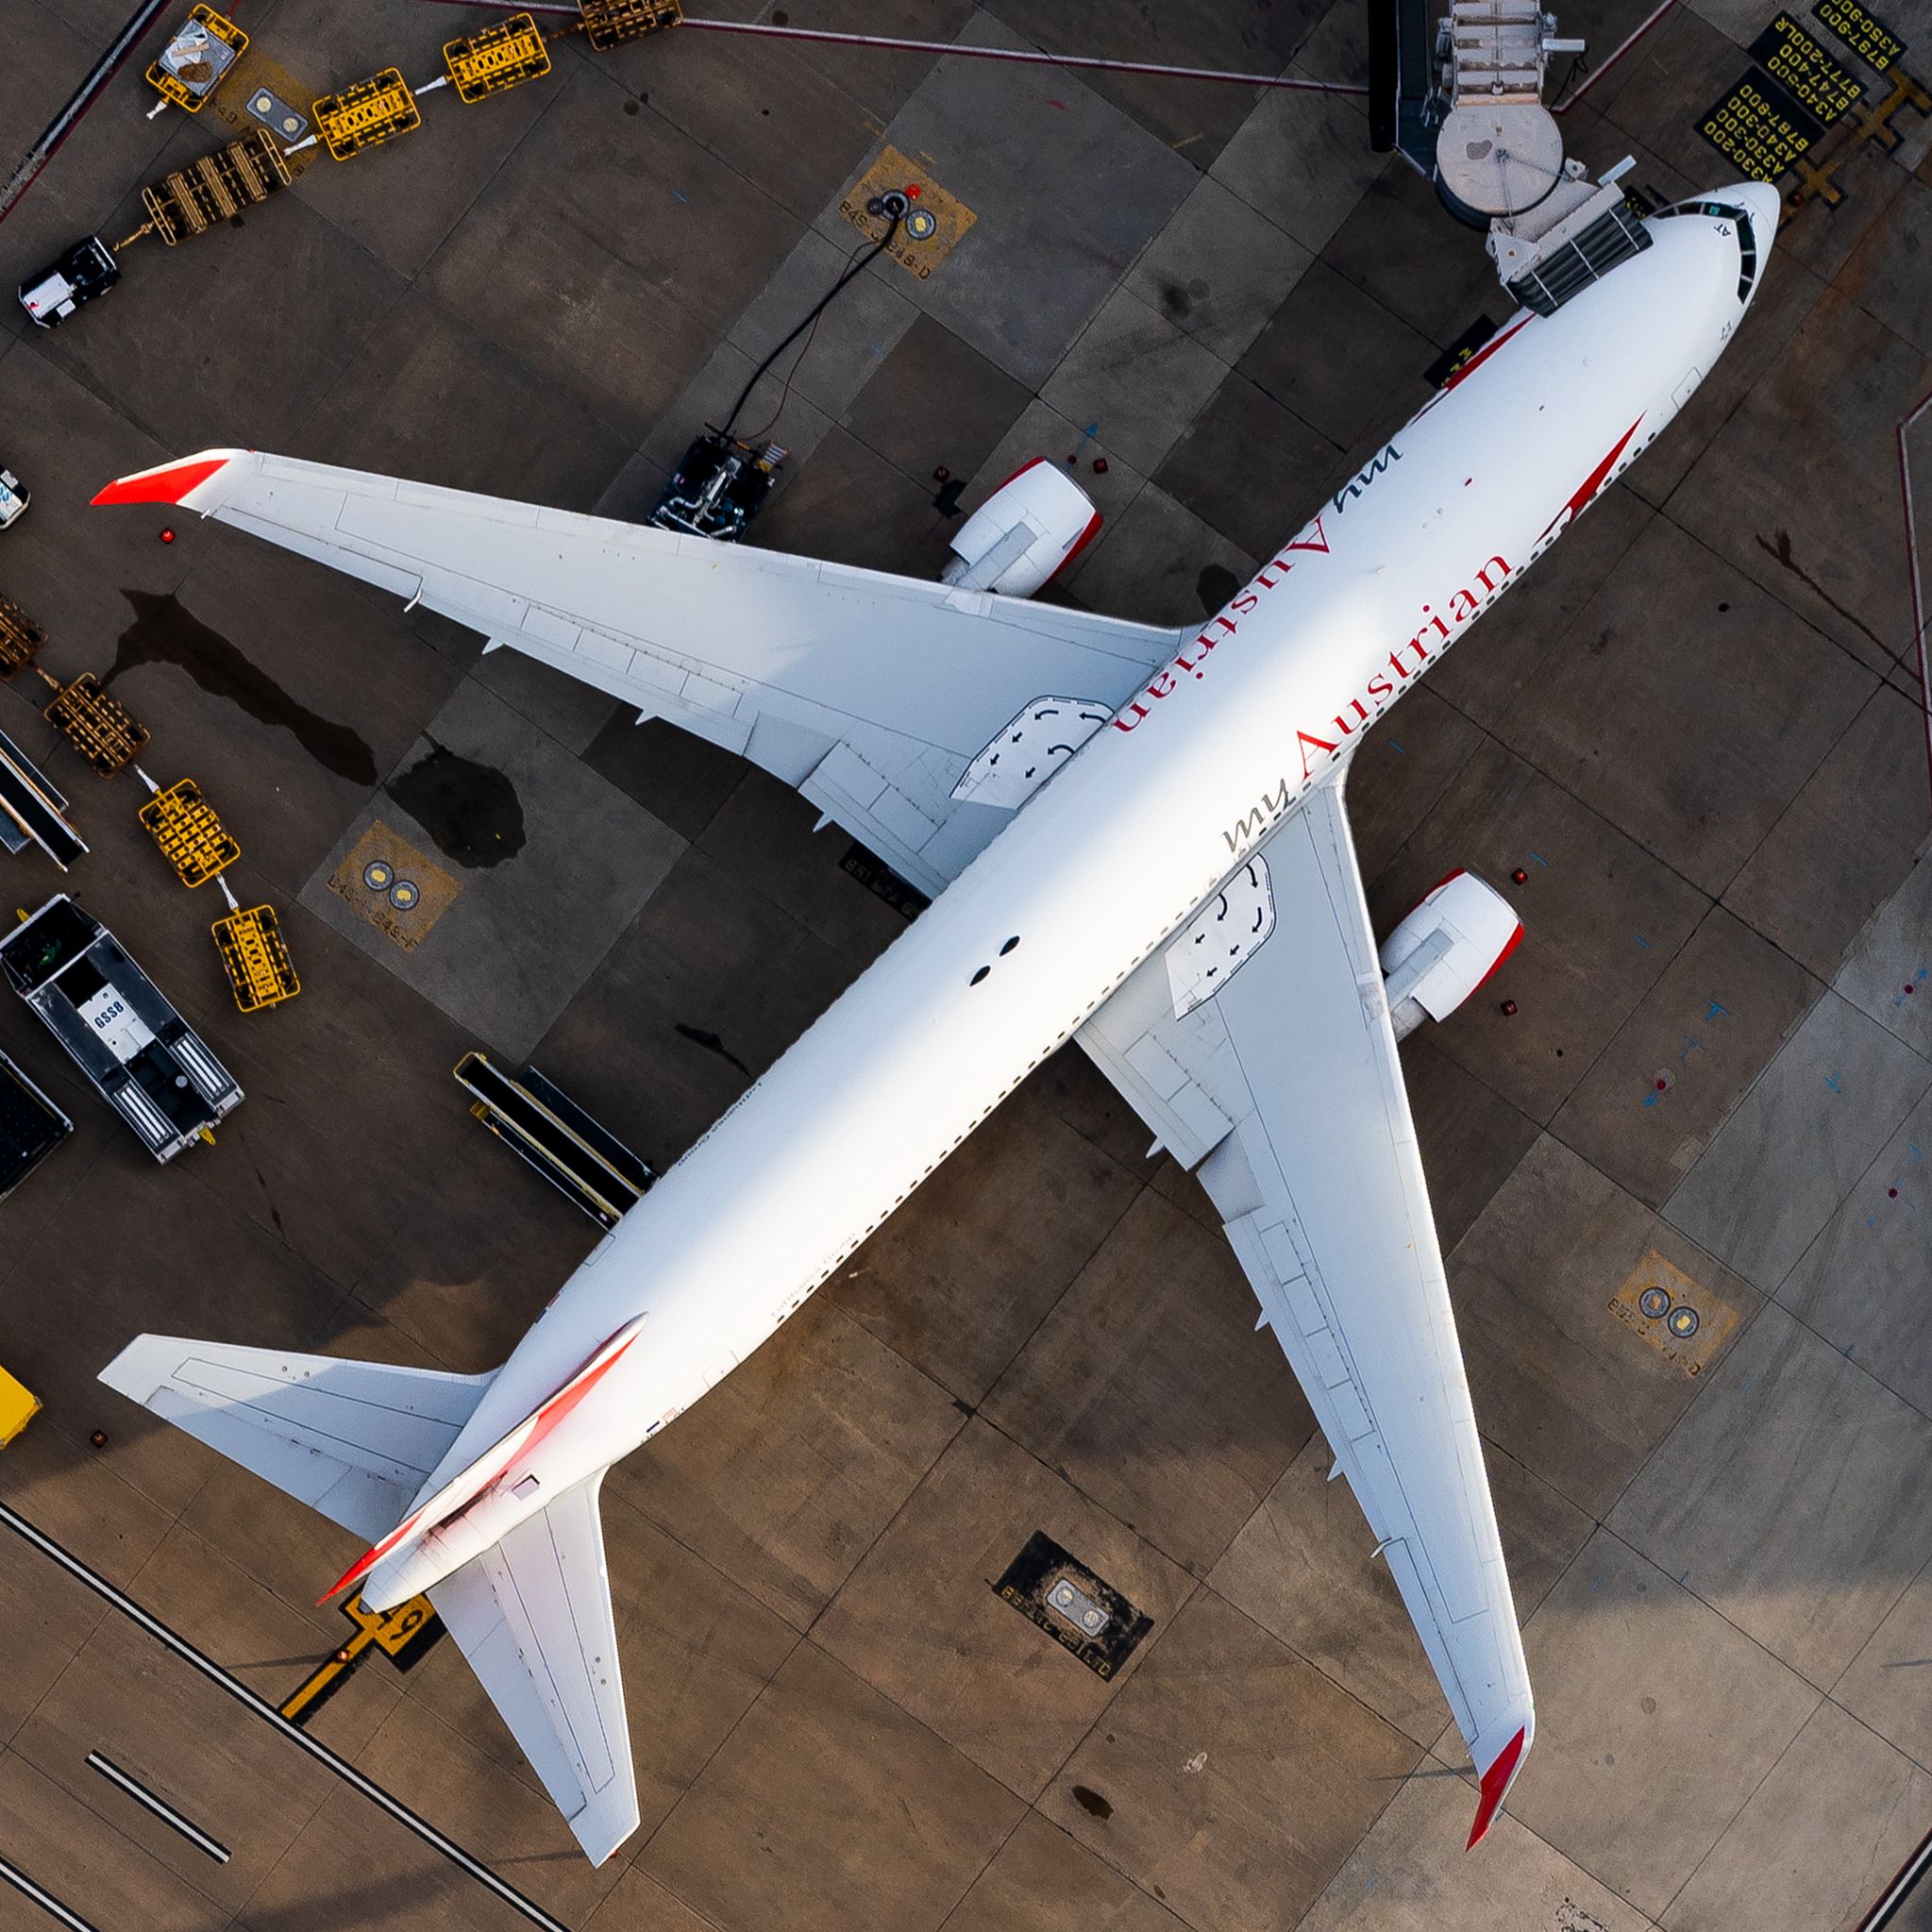 Austrian Airlines Boeing 767 parked on apron 